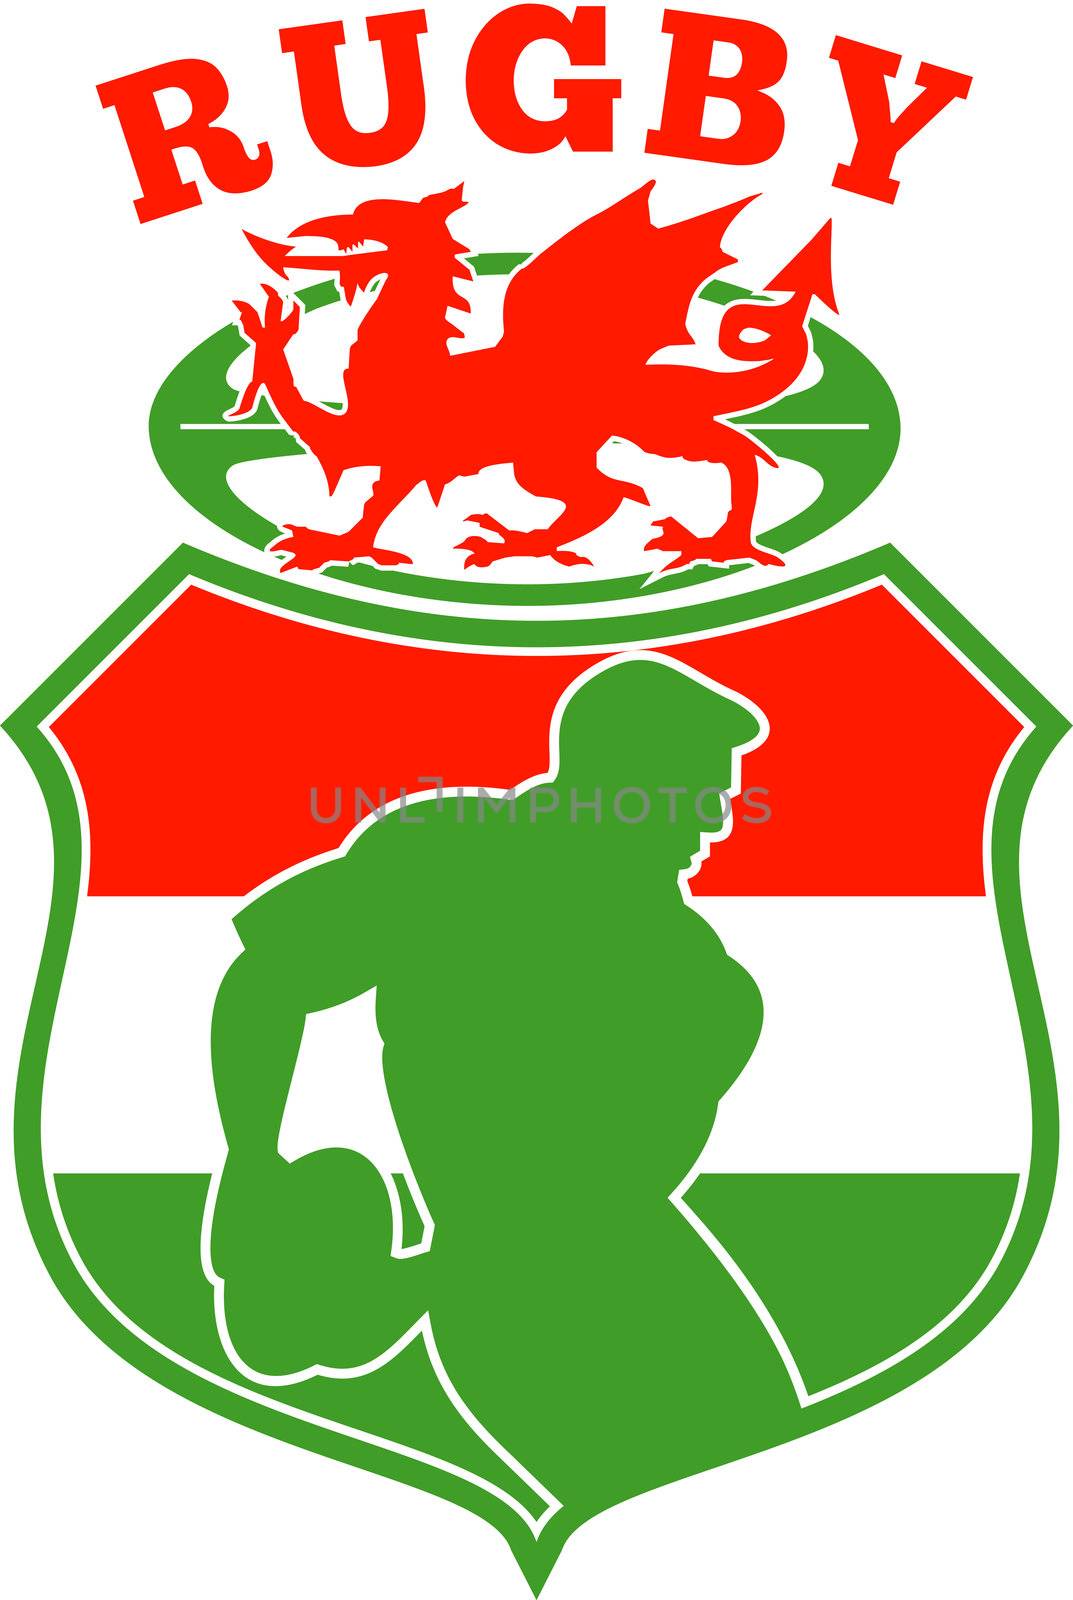 illustration of a Welsh Rugby player silhouette running passing ball inside shield background and red Wales dragon